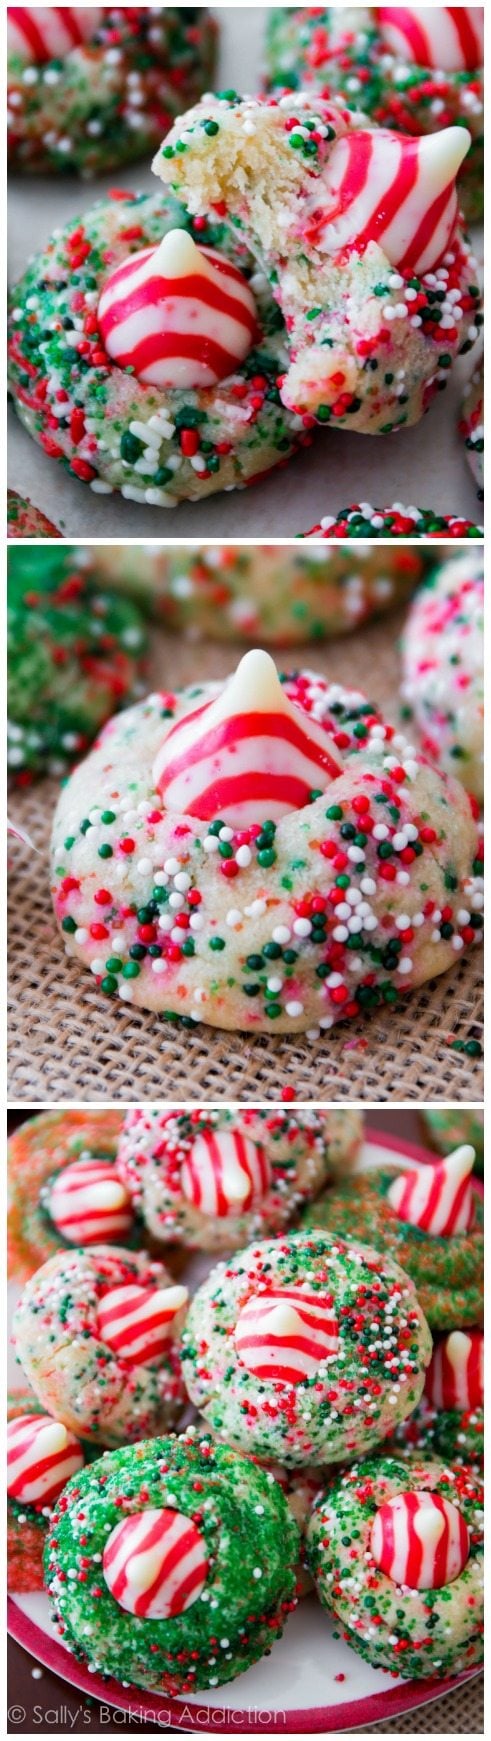 3 images of sugar cookies with christmas sprinkles with a candy cane Hershey's kiss on top